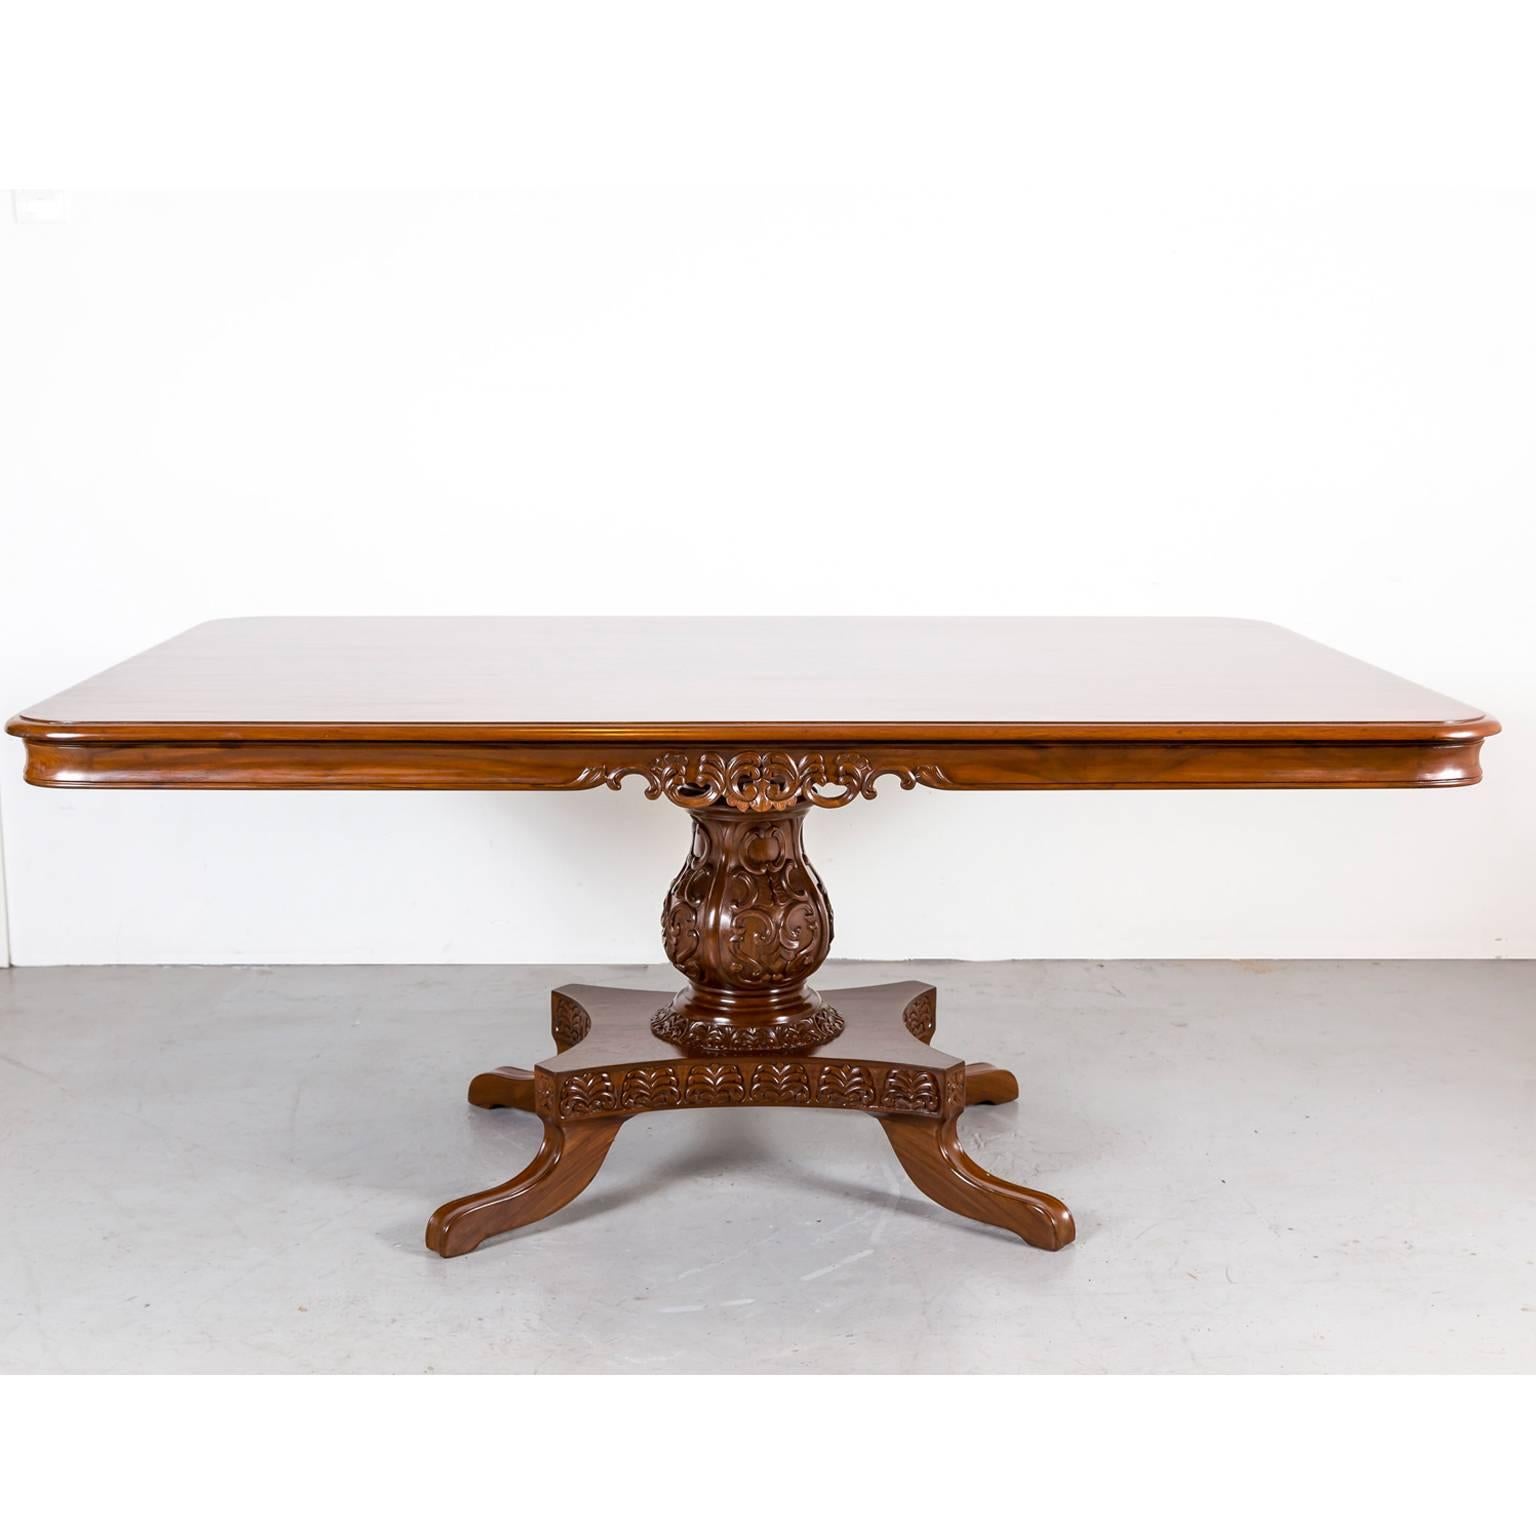 A rectangular British Colonial dining table made of teak wood. The top is figured with an edge above an apron with a nice decorative carving on the long sides.
It sits on a cylindrical turned pedestal with a beautifully carved baluster support that